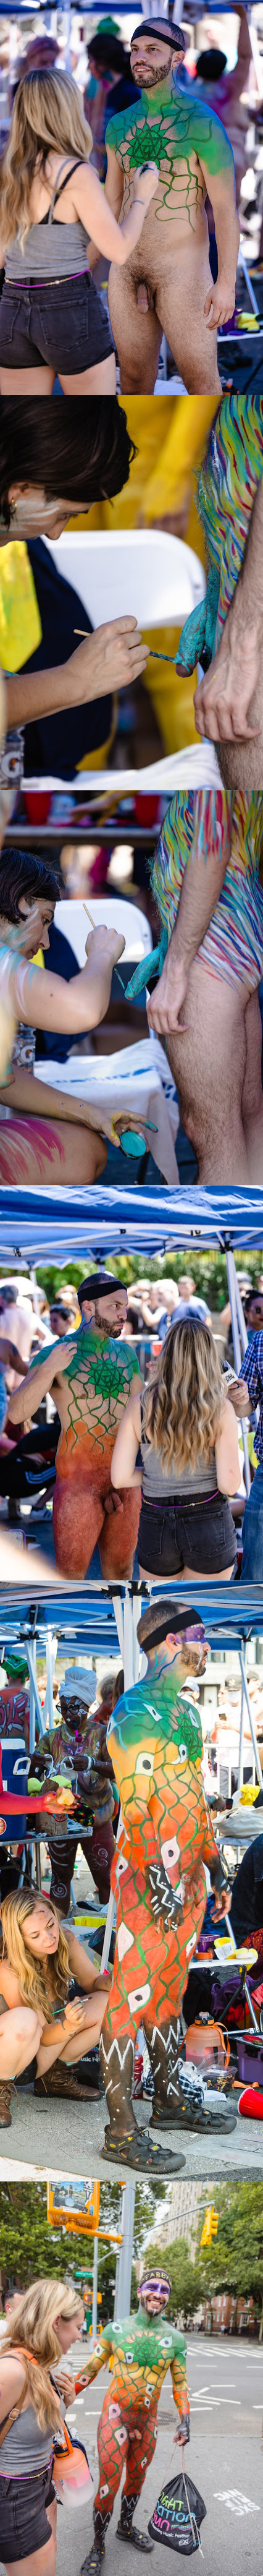 straight guy getting his naked body painted in public by a girl